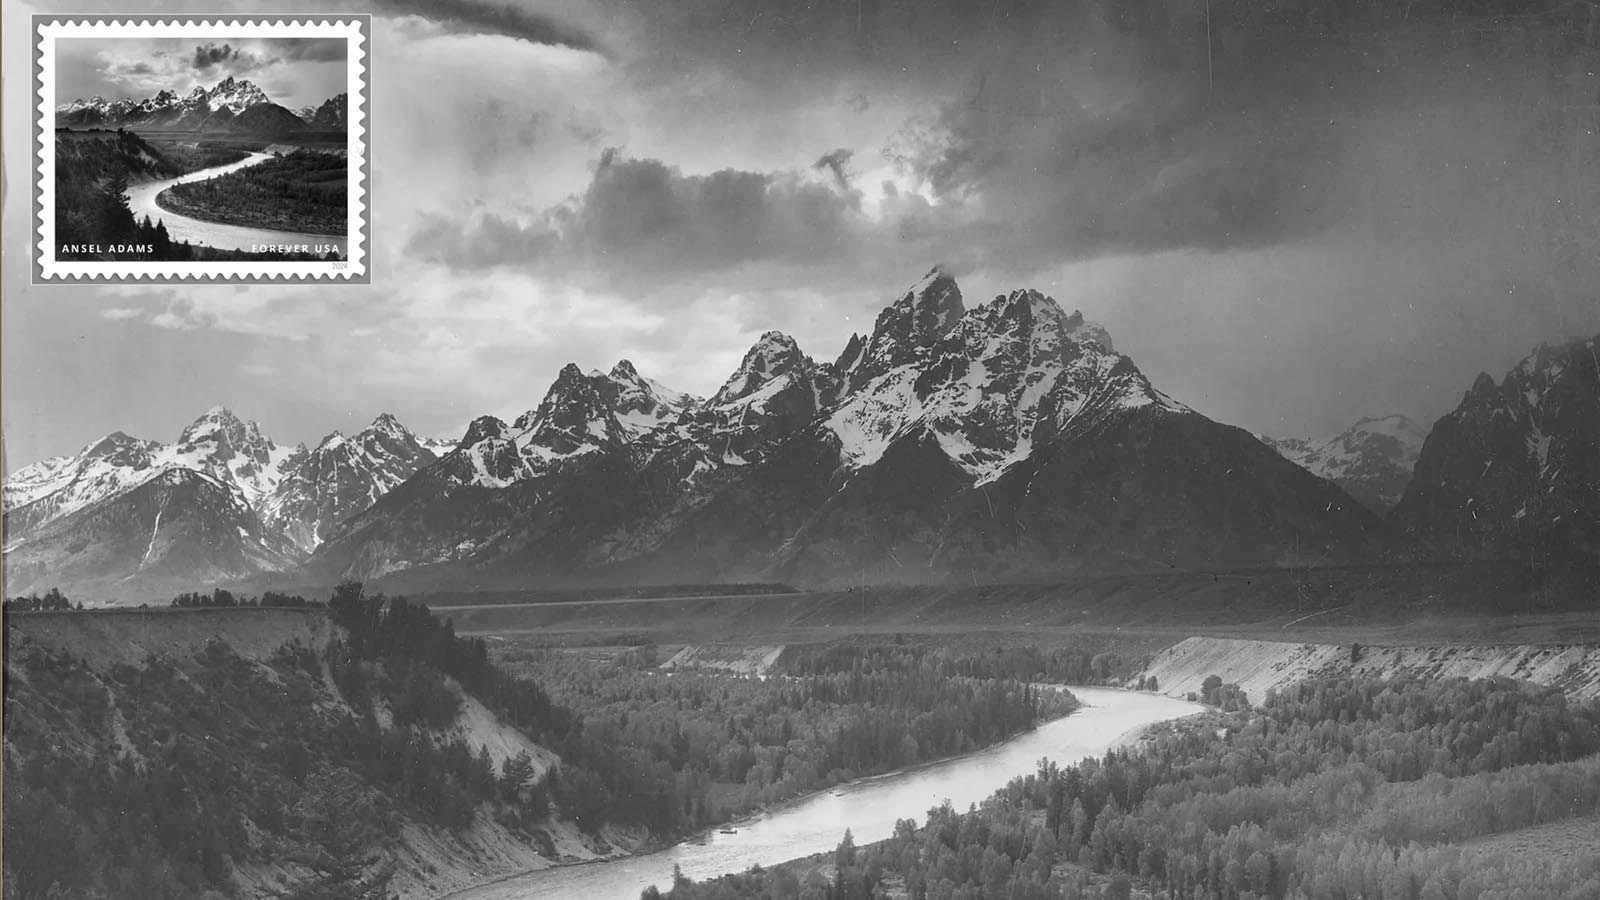 Ansel Adams' iconic image titled "The Tetons and the Snake River" with his Forever Stamp inset.